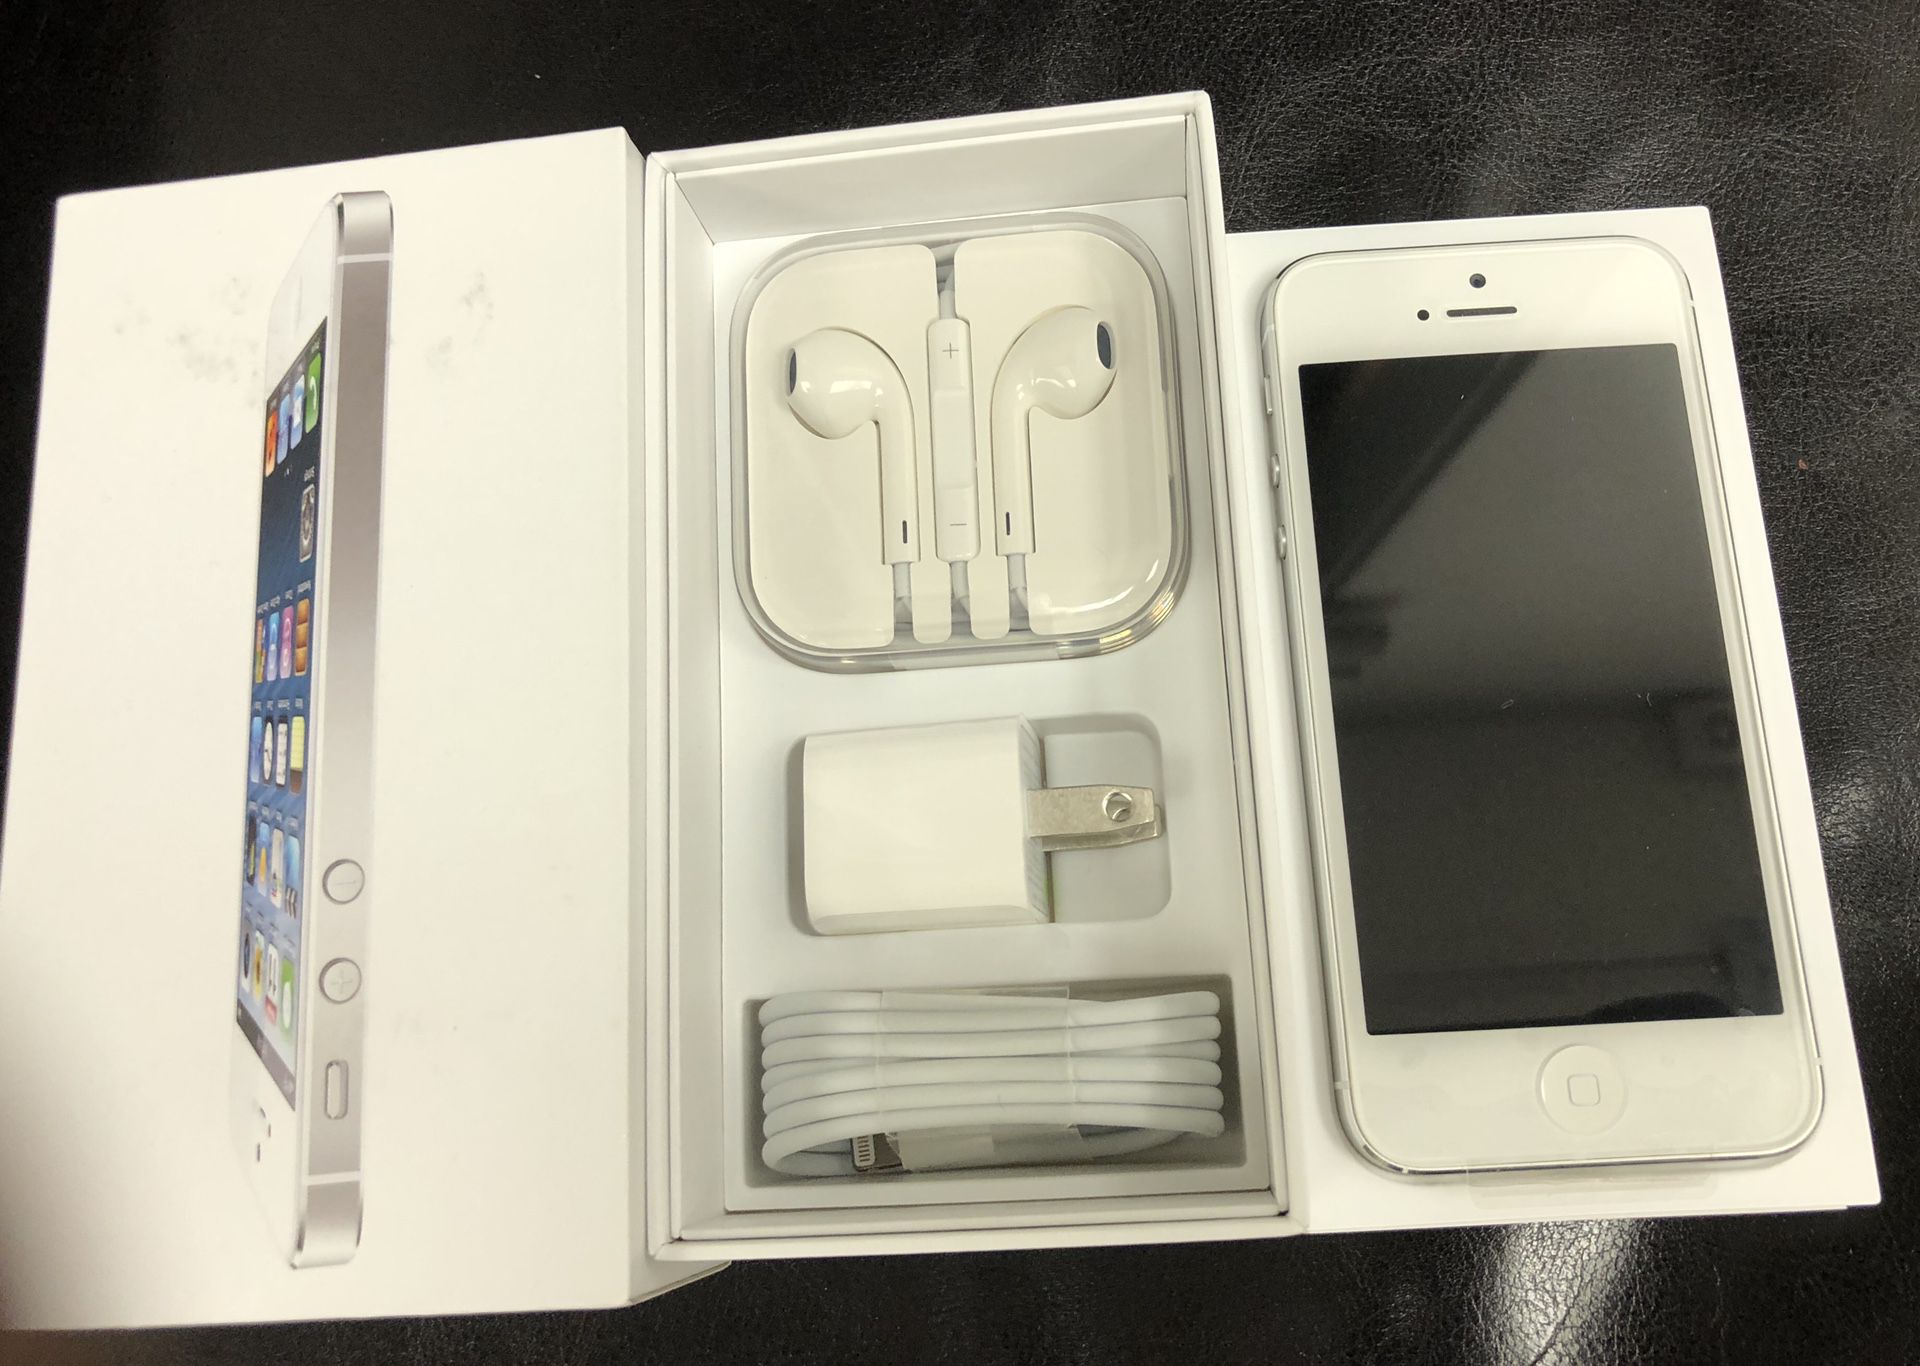 Tempel Isolere Tarif Apple iPhone 5 brand new 16gb white unlocked and box accessories for Sale  in Edison, NJ - OfferUp